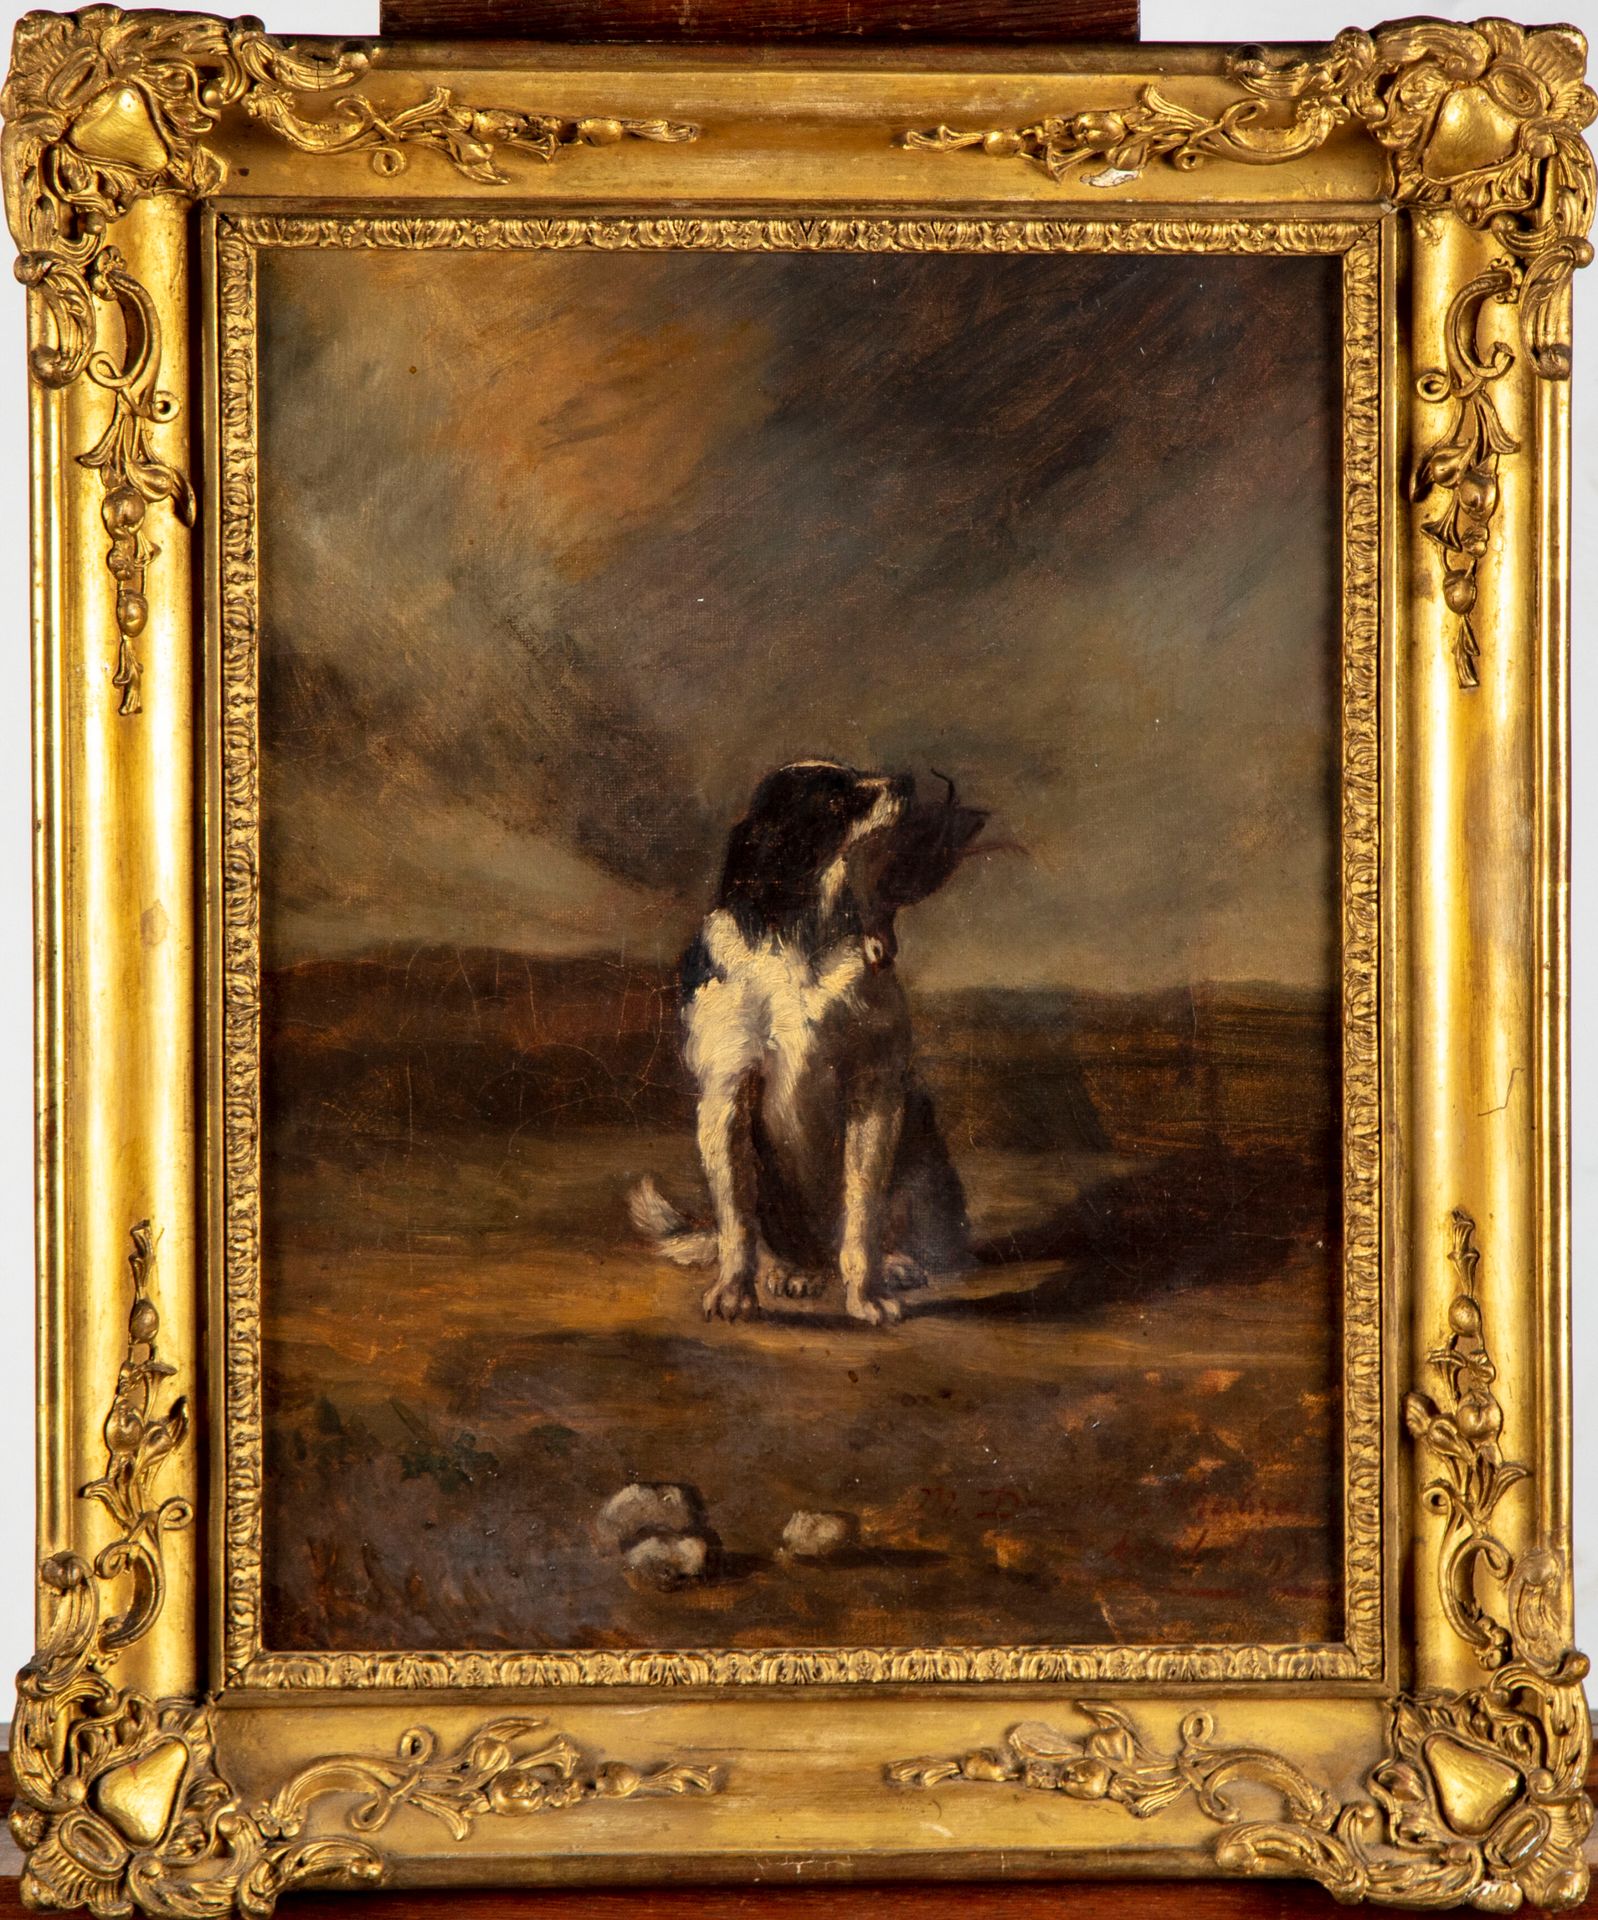 Null FRENCH SCHOOL of the 19th century

Hunting dog holding a bird

Oil on canva&hellip;